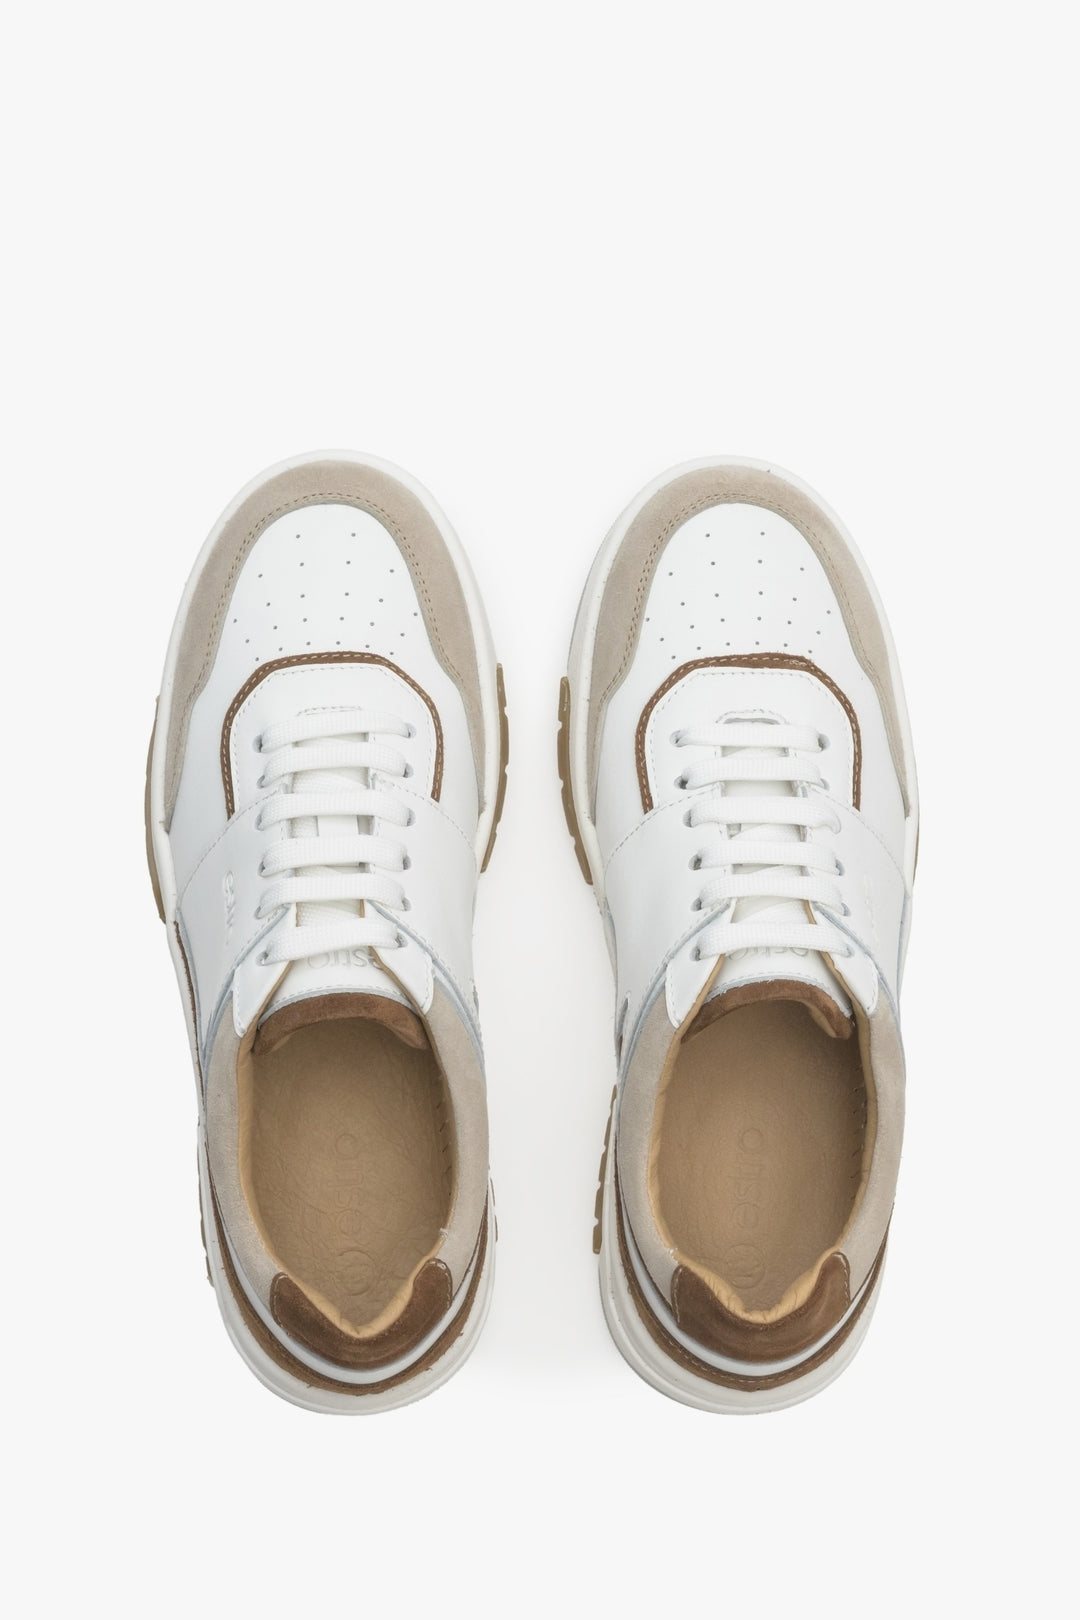 Women's sneakers made of genuine leather and suede in beige, brown, and white.